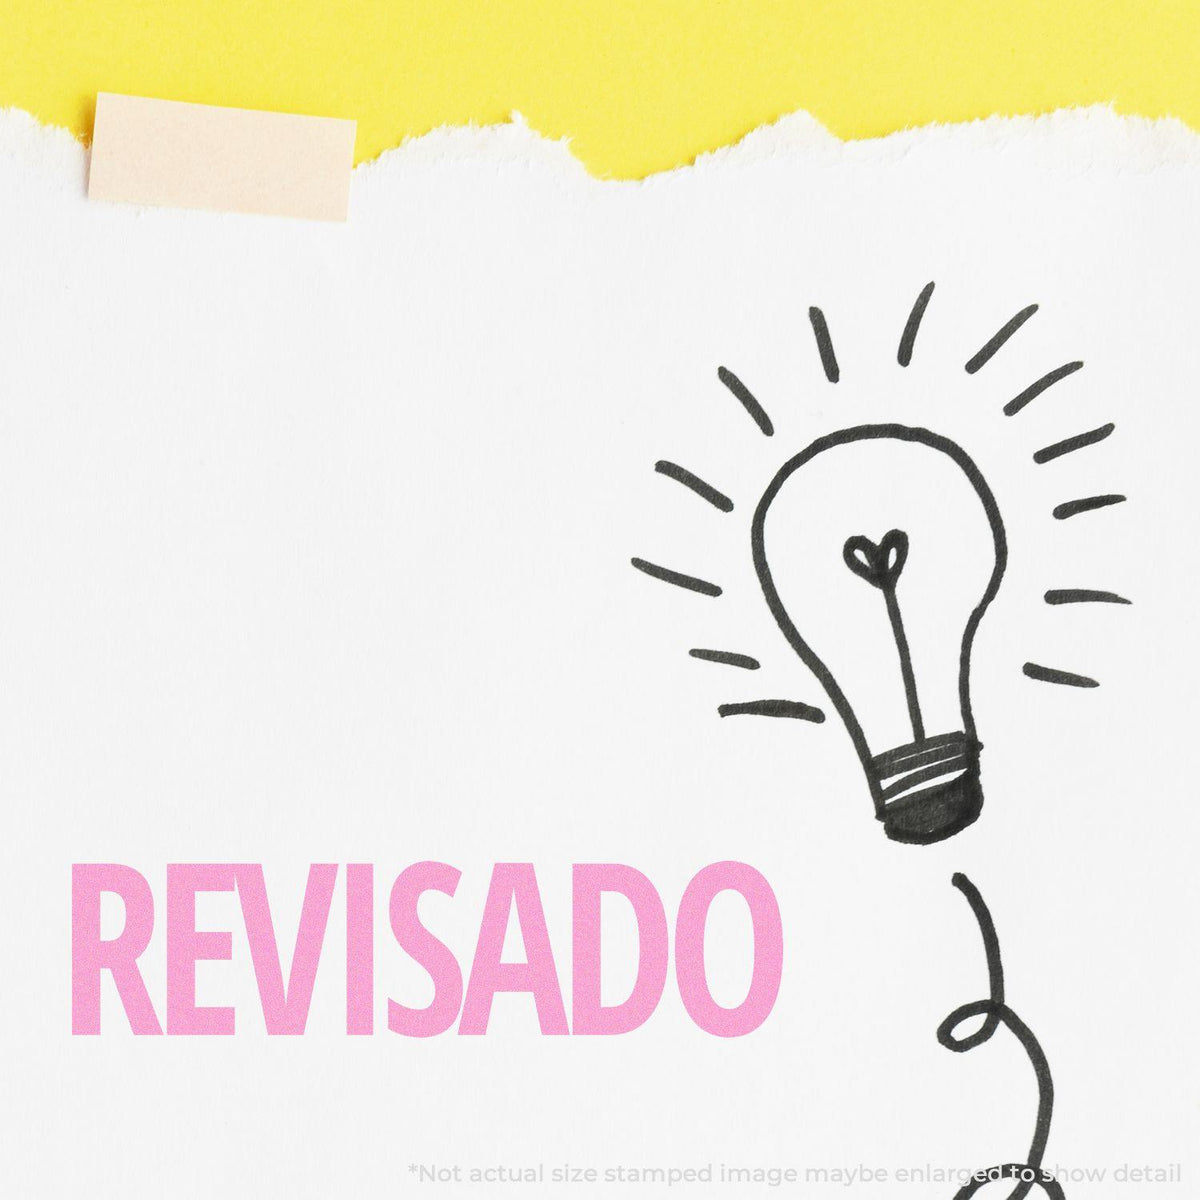 Large Revisado Rubber Stamp In Use Photo